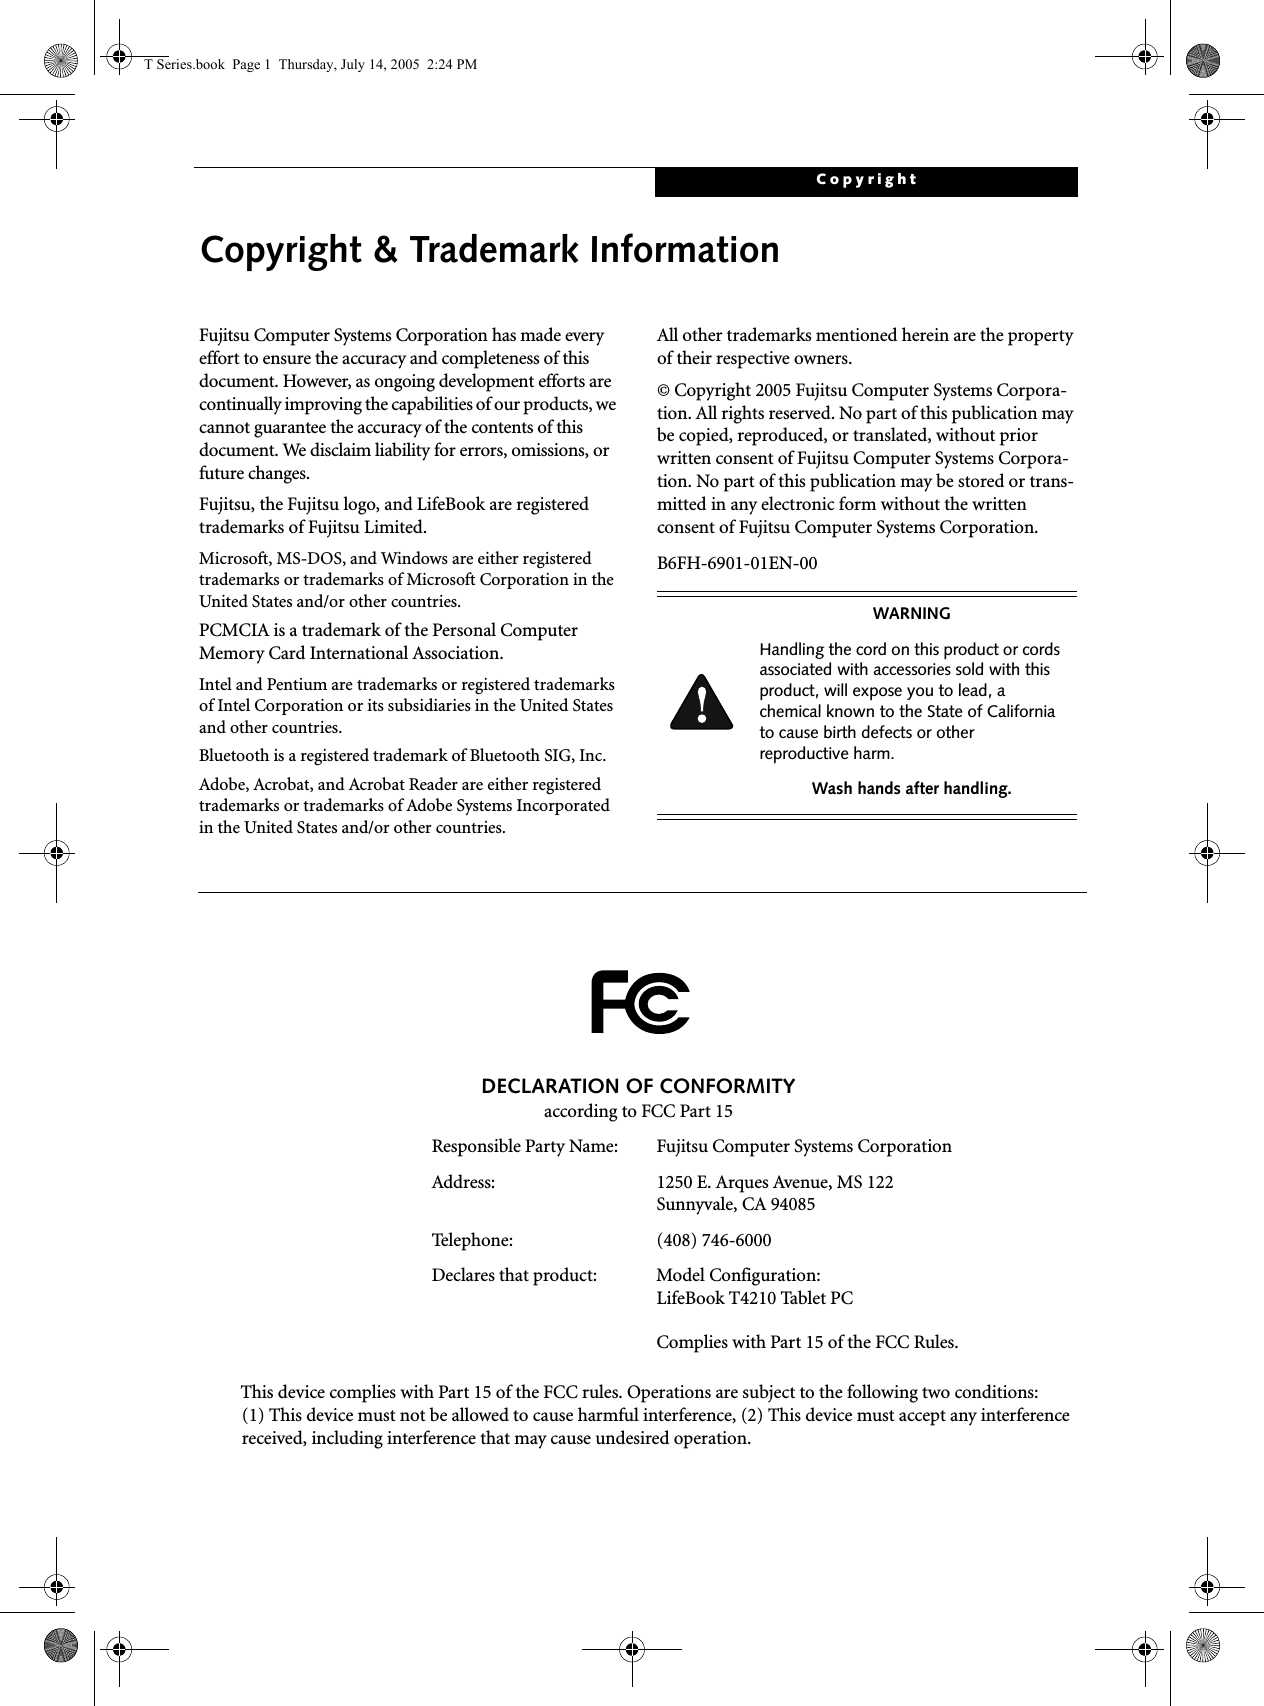 CopyrightCopyright &amp; Trademark InformationFujitsu Computer Systems Corporation has made every effort to ensure the accuracy and completeness of this document. However, as ongoing development efforts are continually improving the capabilities of our products, we cannot guarantee the accuracy of the contents of this document. We disclaim liability for errors, omissions, or future changes.Fujitsu, the Fujitsu logo, and LifeBook are registered trademarks of Fujitsu Limited.Microsoft, MS-DOS, and Windows are either registered trademarks or trademarks of Microsoft Corporation in the United States and/or other countries.PCMCIA is a trademark of the Personal Computer Memory Card International Association.Intel and Pentium are trademarks or registered trademarks of Intel Corporation or its subsidiaries in the United States and other countries.Bluetooth is a registered trademark of Bluetooth SIG, Inc.Adobe, Acrobat, and Acrobat Reader are either registered trademarks or trademarks of Adobe Systems Incorporated in the United States and/or other countries.All other trademarks mentioned herein are the property of their respective owners.© Copyright 2005 Fujitsu Computer Systems Corpora-tion. All rights reserved. No part of this publication may be copied, reproduced, or translated, without prior written consent of Fujitsu Computer Systems Corpora-tion. No part of this publication may be stored or trans-mitted in any electronic form without the written consent of Fujitsu Computer Systems Corporation.B6FH-6901-01EN-00WARNINGHandling the cord on this product or cords associated with accessories sold with this product, will expose you to lead, a chemical known to the State of California to cause birth defects or other reproductive harm. Wash hands after handling.DECLARATION OF CONFORMITYaccording to FCC Part 15Responsible Party Name: Fujitsu Computer Systems CorporationAddress:  1250 E. Arques Avenue, MS 122Sunnyvale, CA 94085Telephone: (408) 746-6000Declares that product: Model Configuration:LifeBook T4210 Tablet PCComplies with Part 15 of the FCC Rules.This device complies with Part 15 of the FCC rules. Operations are subject to the following two conditions:(1) This device must not be allowed to cause harmful interference, (2) This device must accept any interference received, including interference that may cause undesired operation.T Series.book  Page 1  Thursday, July 14, 2005  2:24 PM